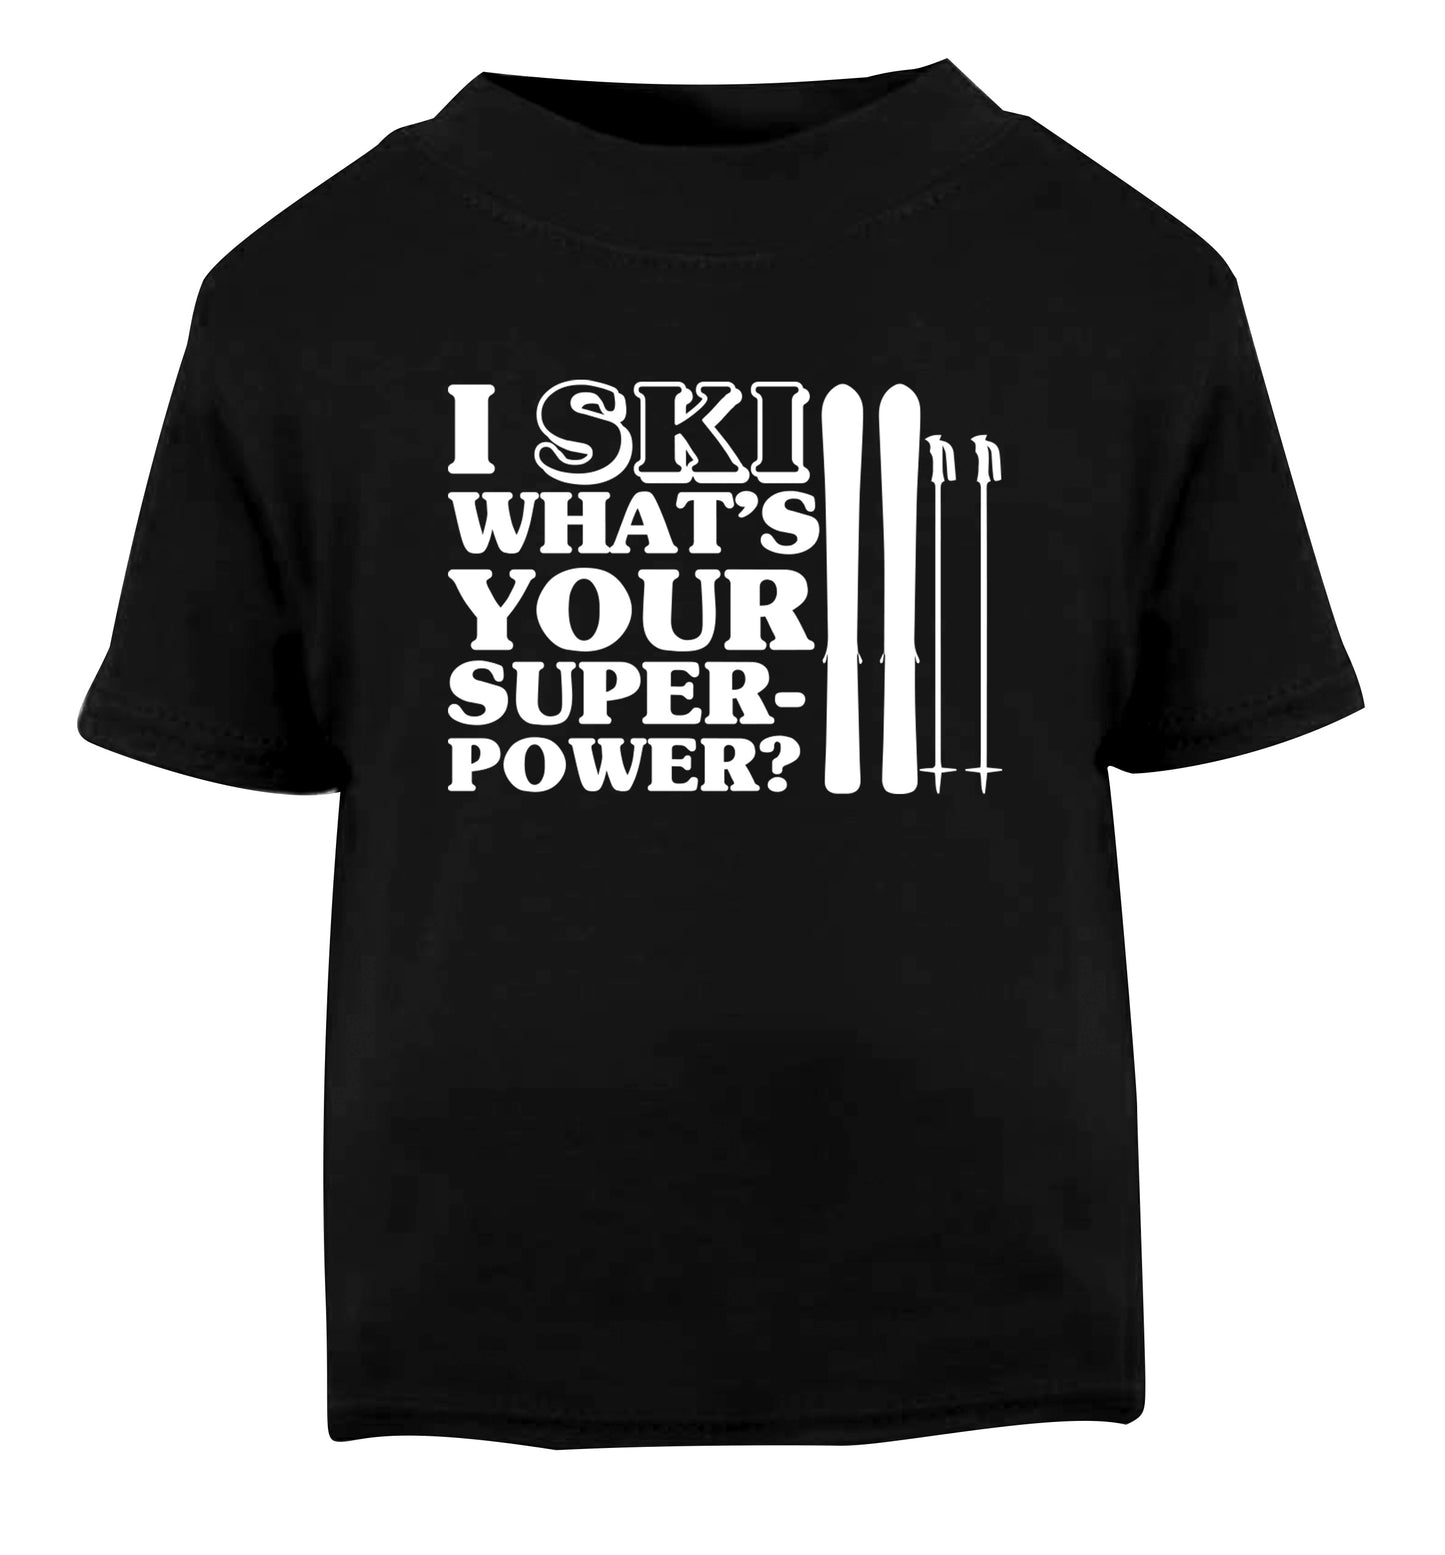 I ski what's your superpower? Black Baby Toddler Tshirt 2 years